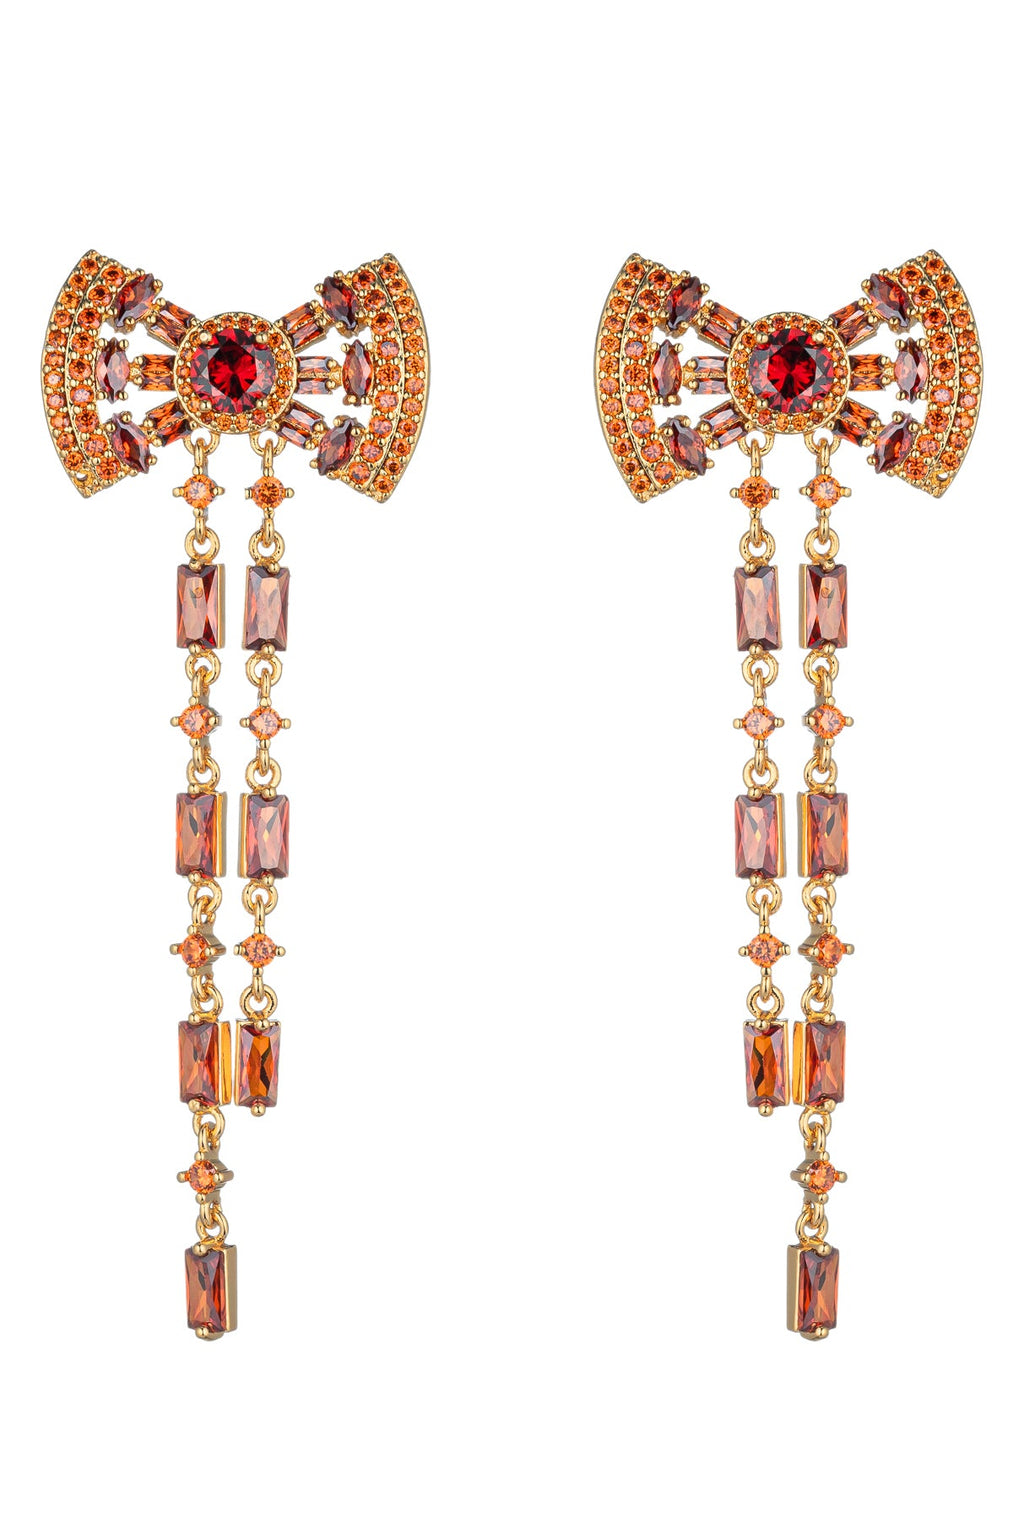 Red Bow Cubic Zirconia Drop Earrings: Elegant Accents for Any Occasion.